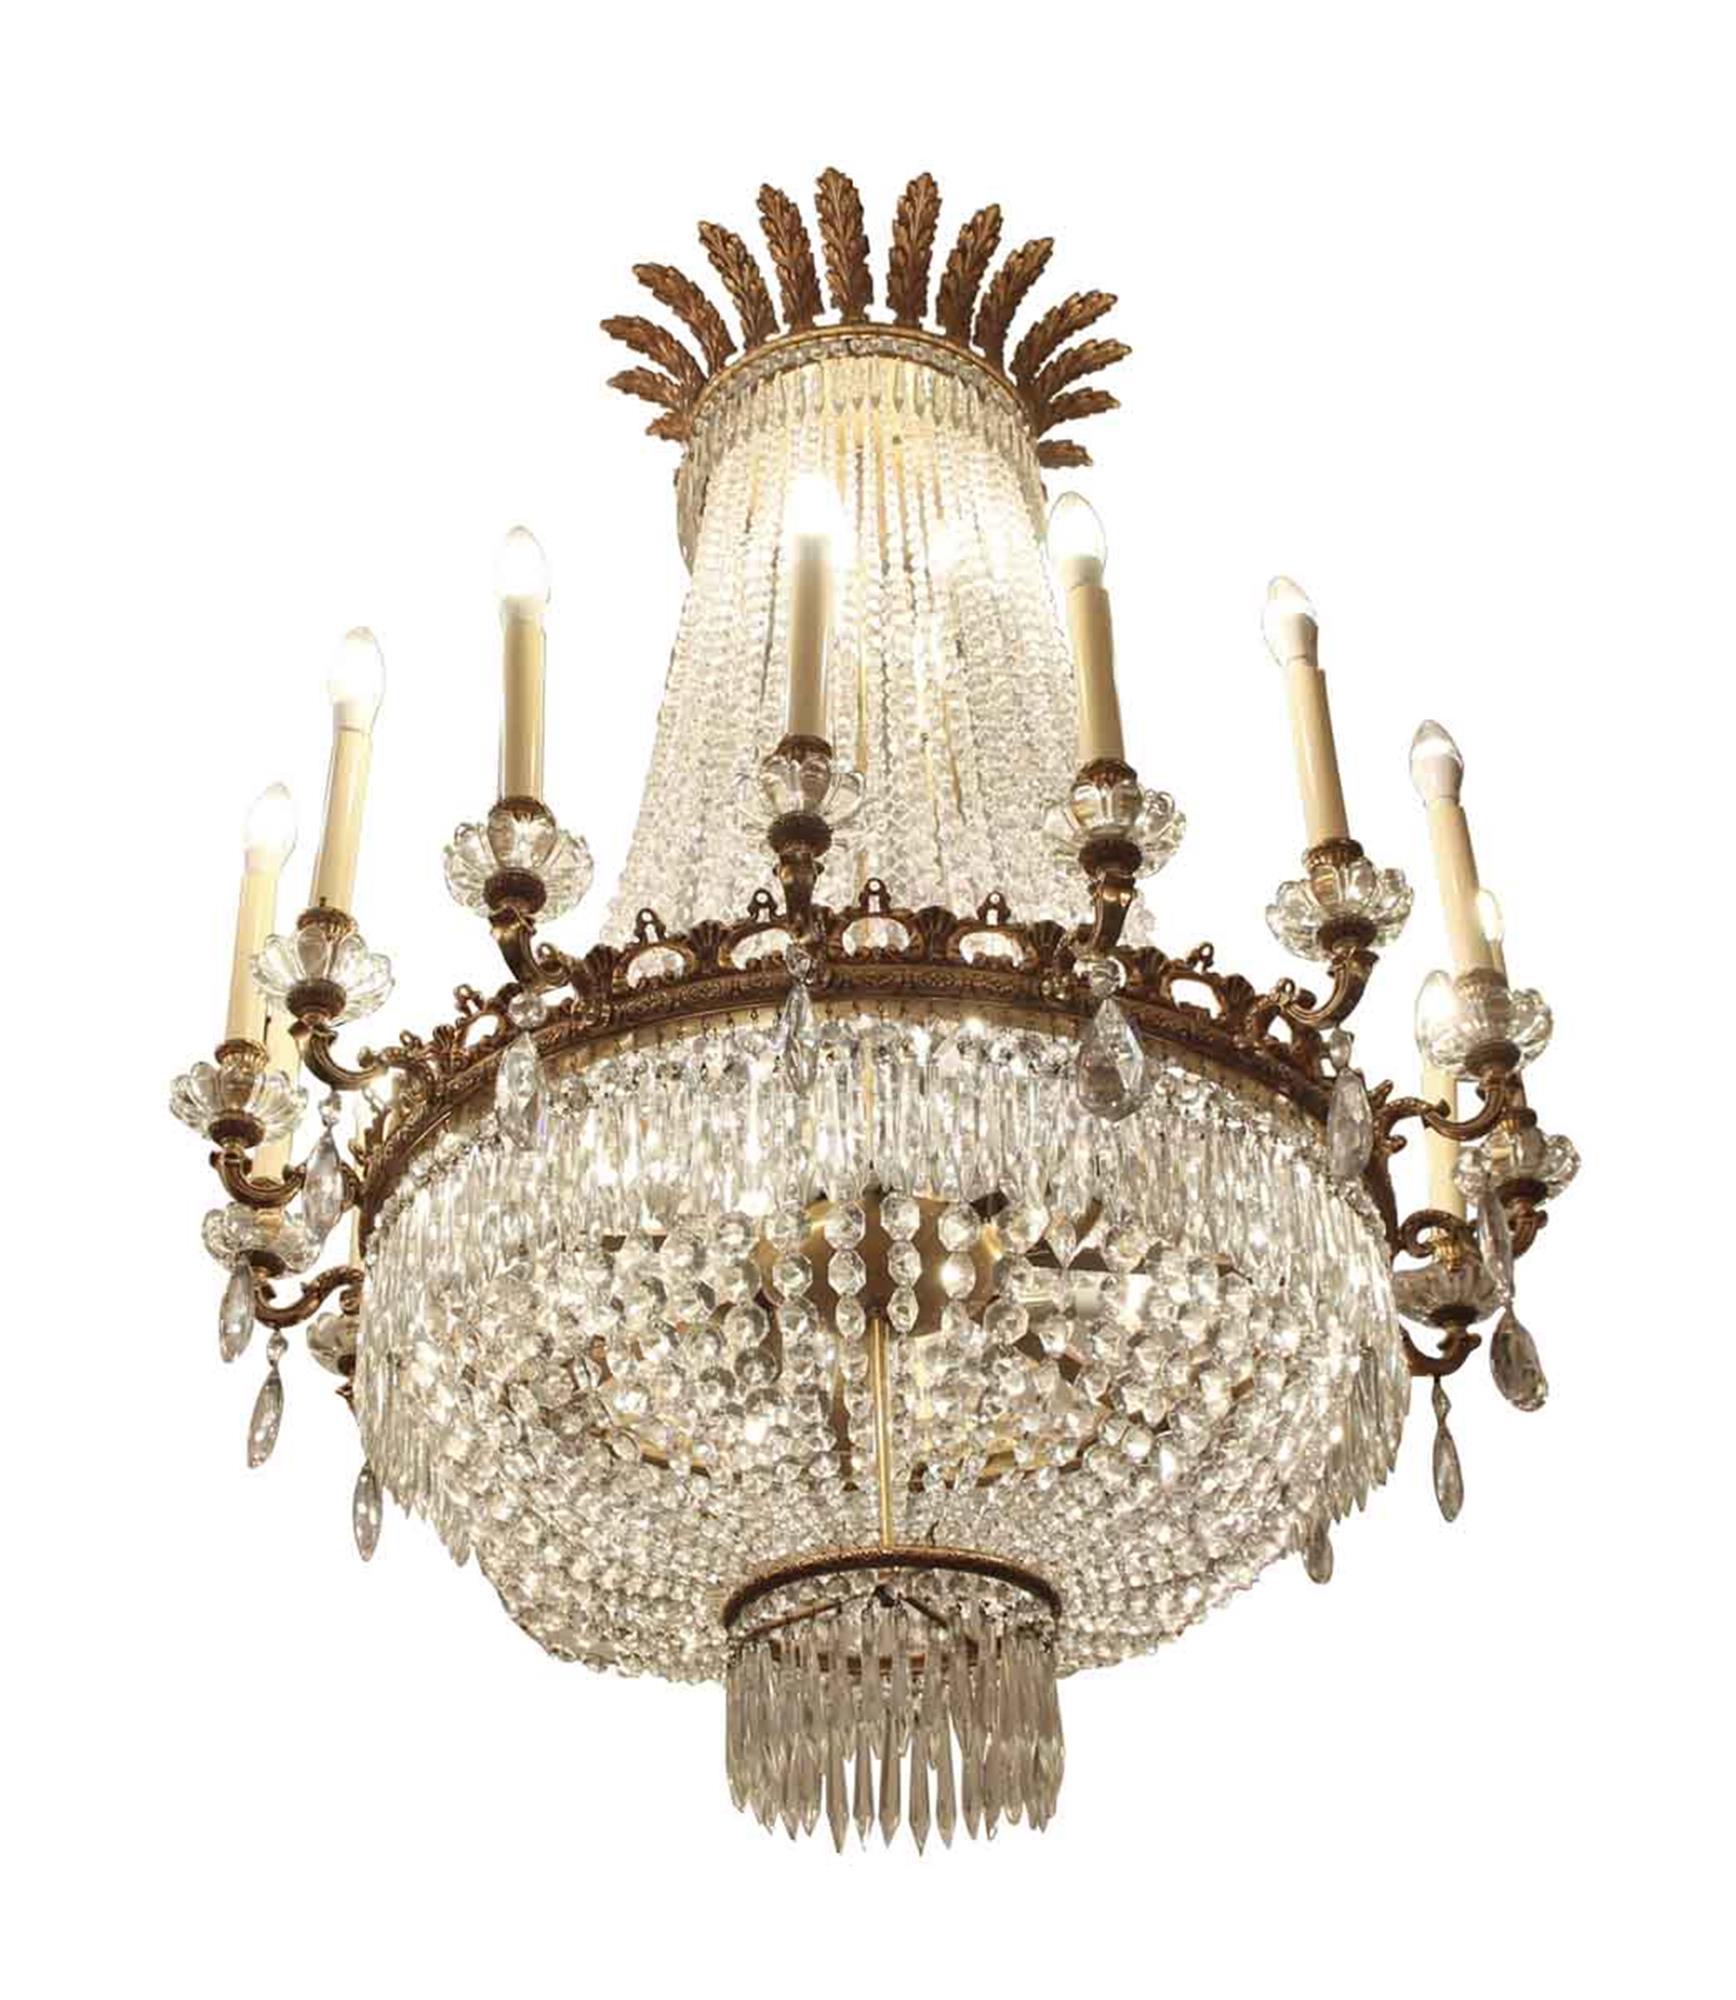 Originally from the 1920s Palace Hotel in NYC, this wonderful large gilt bronze and crystal beaded chandelier has been completely restored. It has 16 candle lights around the perimeter and 16 lights inside behind the crystal. Done in an Empire